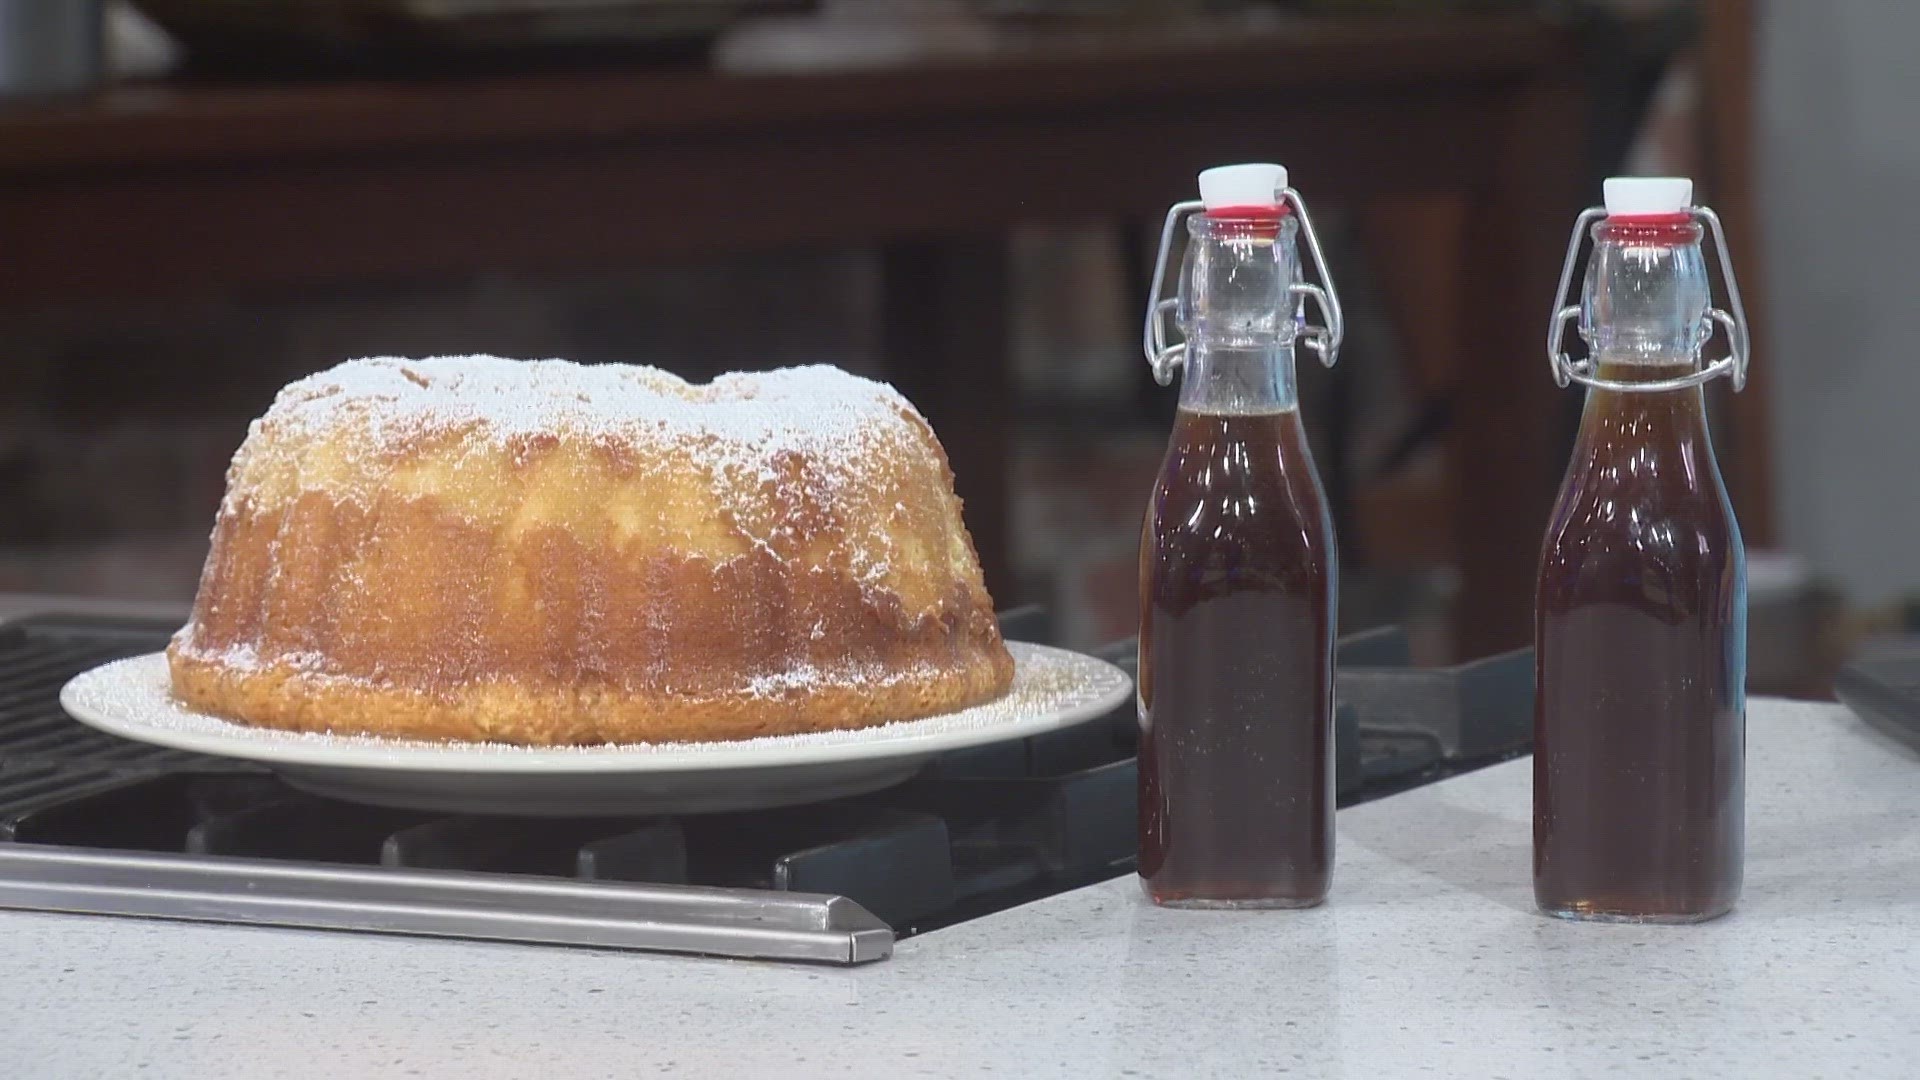 Chef Kevin Belton is in the WWLTV kitchen cooking up Almond Amaretto Pound Cake.